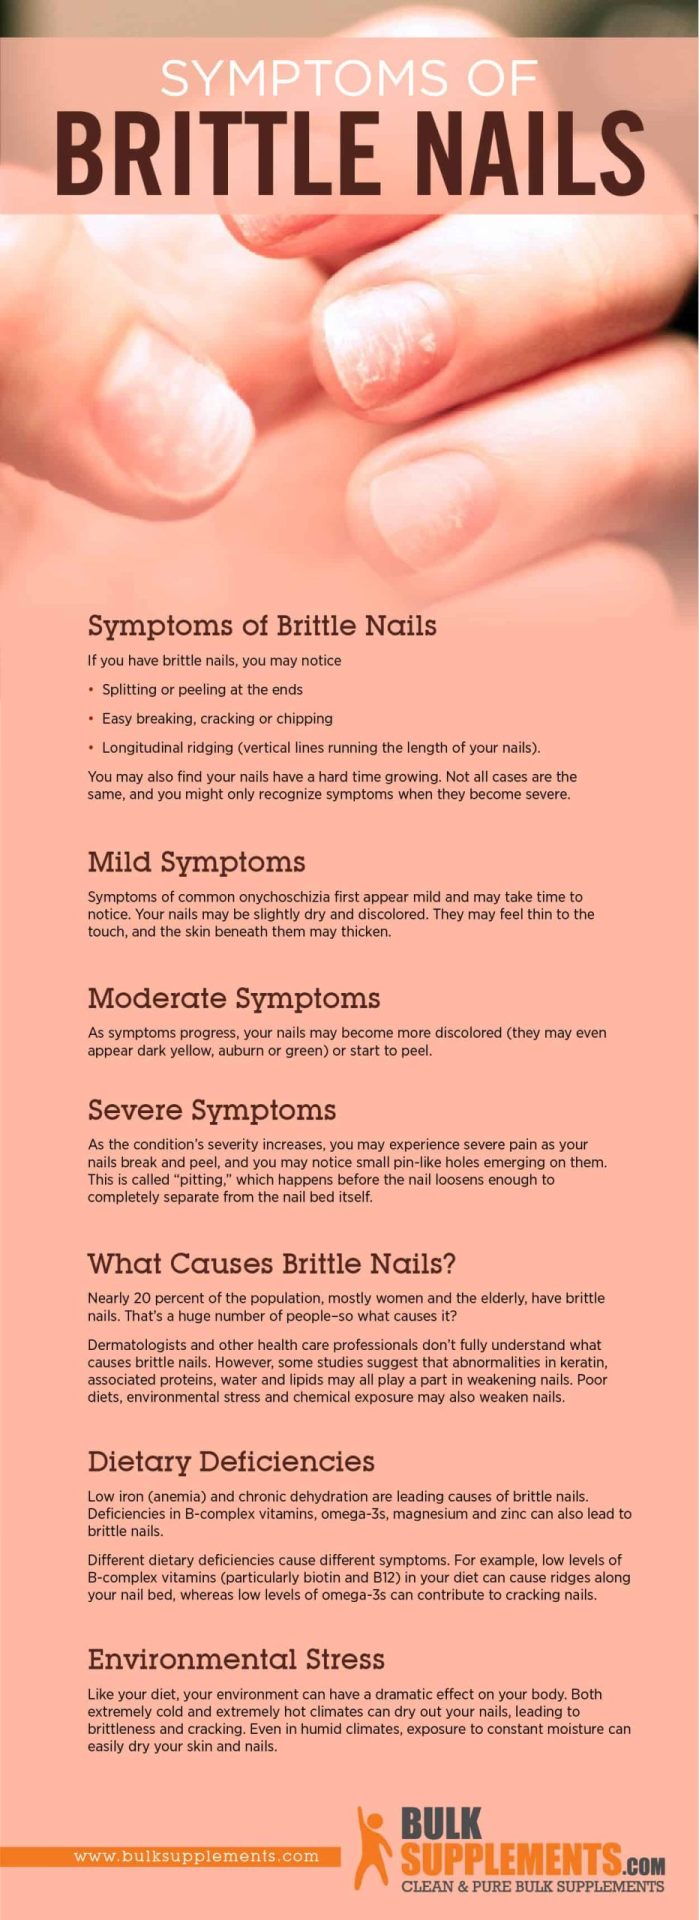 Brittle Nails in Dogs - A Common Issue with Many Causes - DogVills | Brittle  nails, Dog nails, Dog health tips